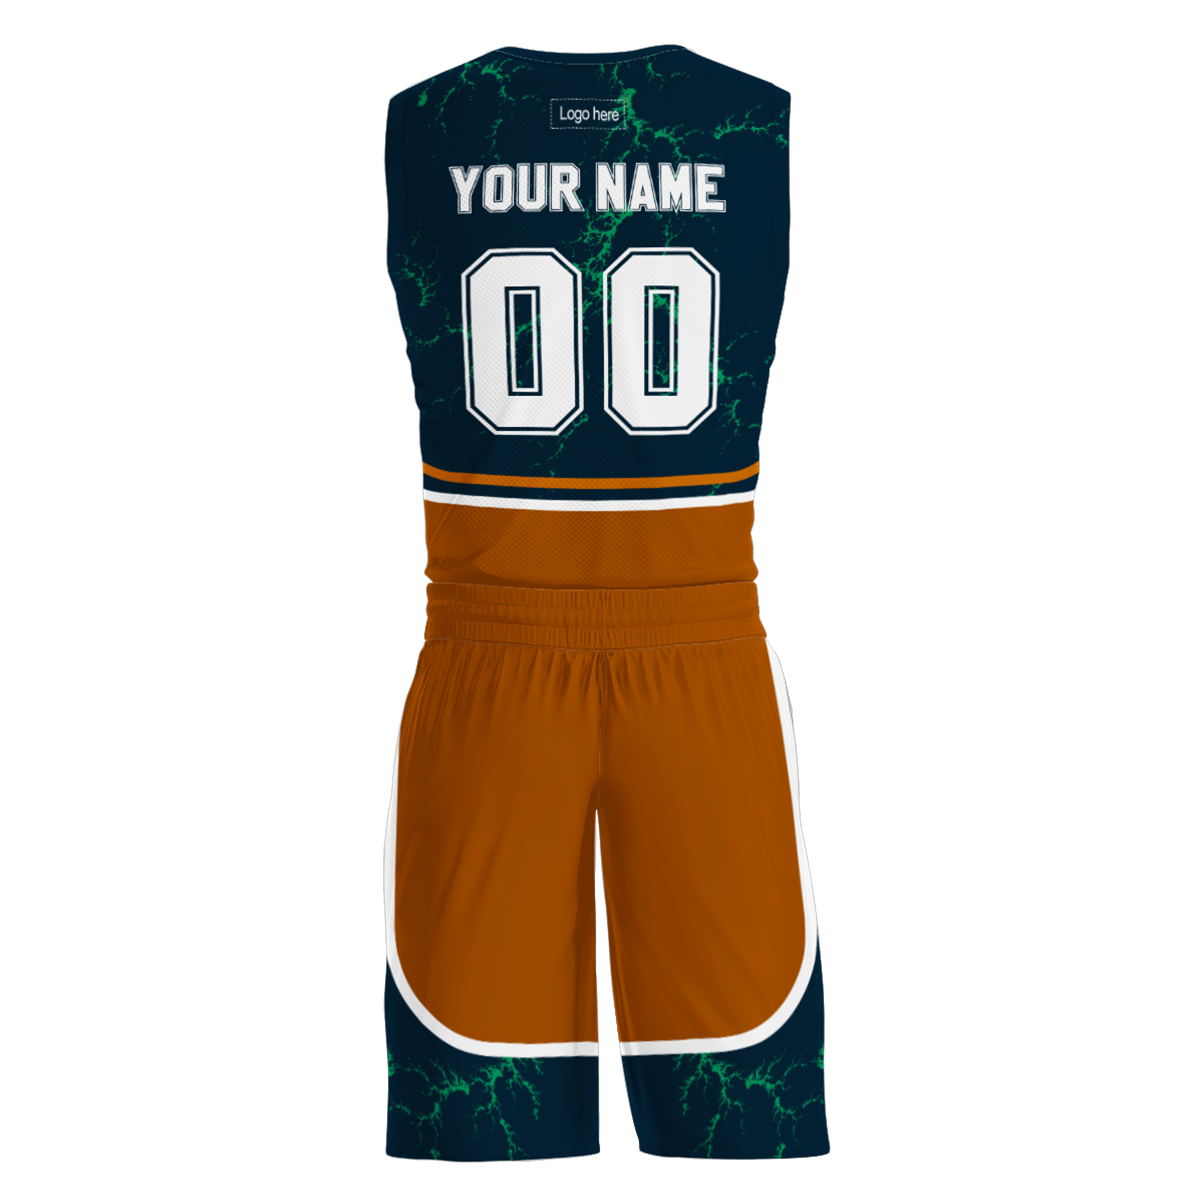 Personalized Design Customized Basketball Wear Jersey Uniforms Print on Demand Training Basketball Suits